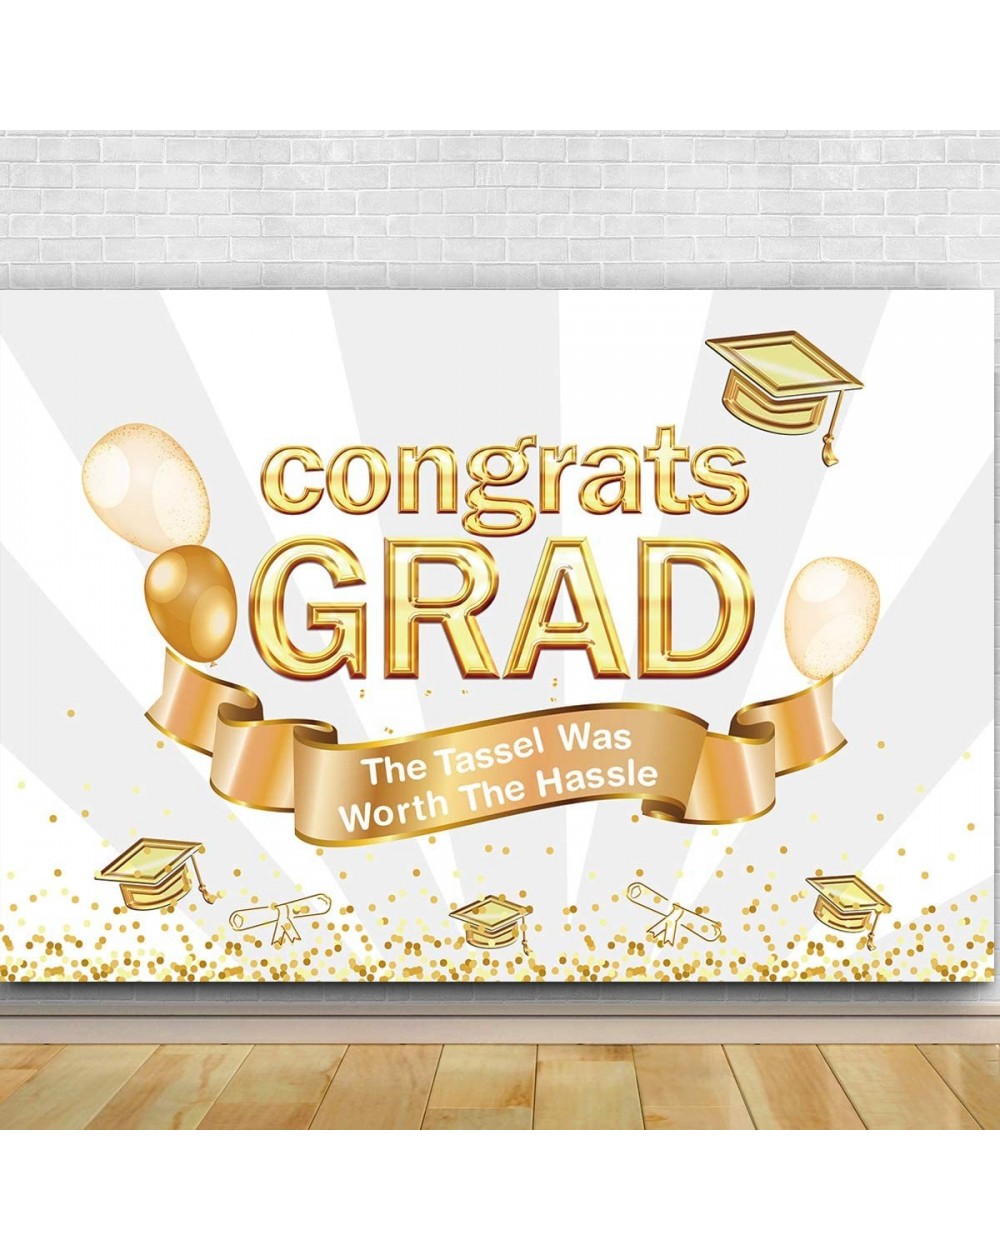 Banners & Garlands Graduation Party Photography Backdrop - Congrats Grad Prom Decorations - Photo Studio Booth Props Cake Tab...